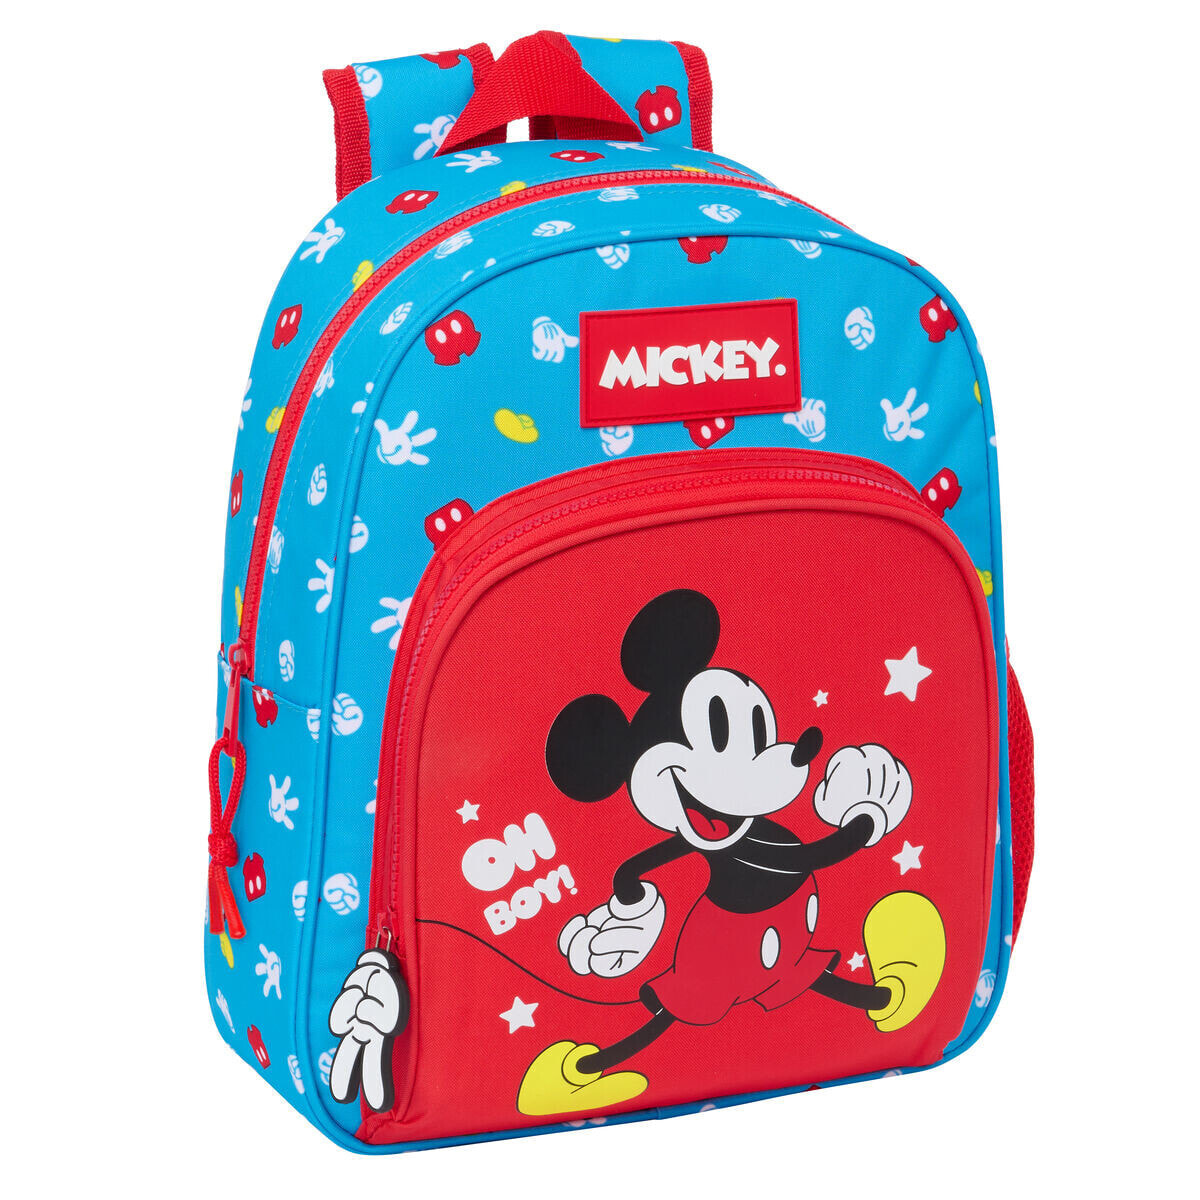 School Bag Mickey Mouse Clubhouse Fantastic Blue Red 28 x 34 x 10 cm